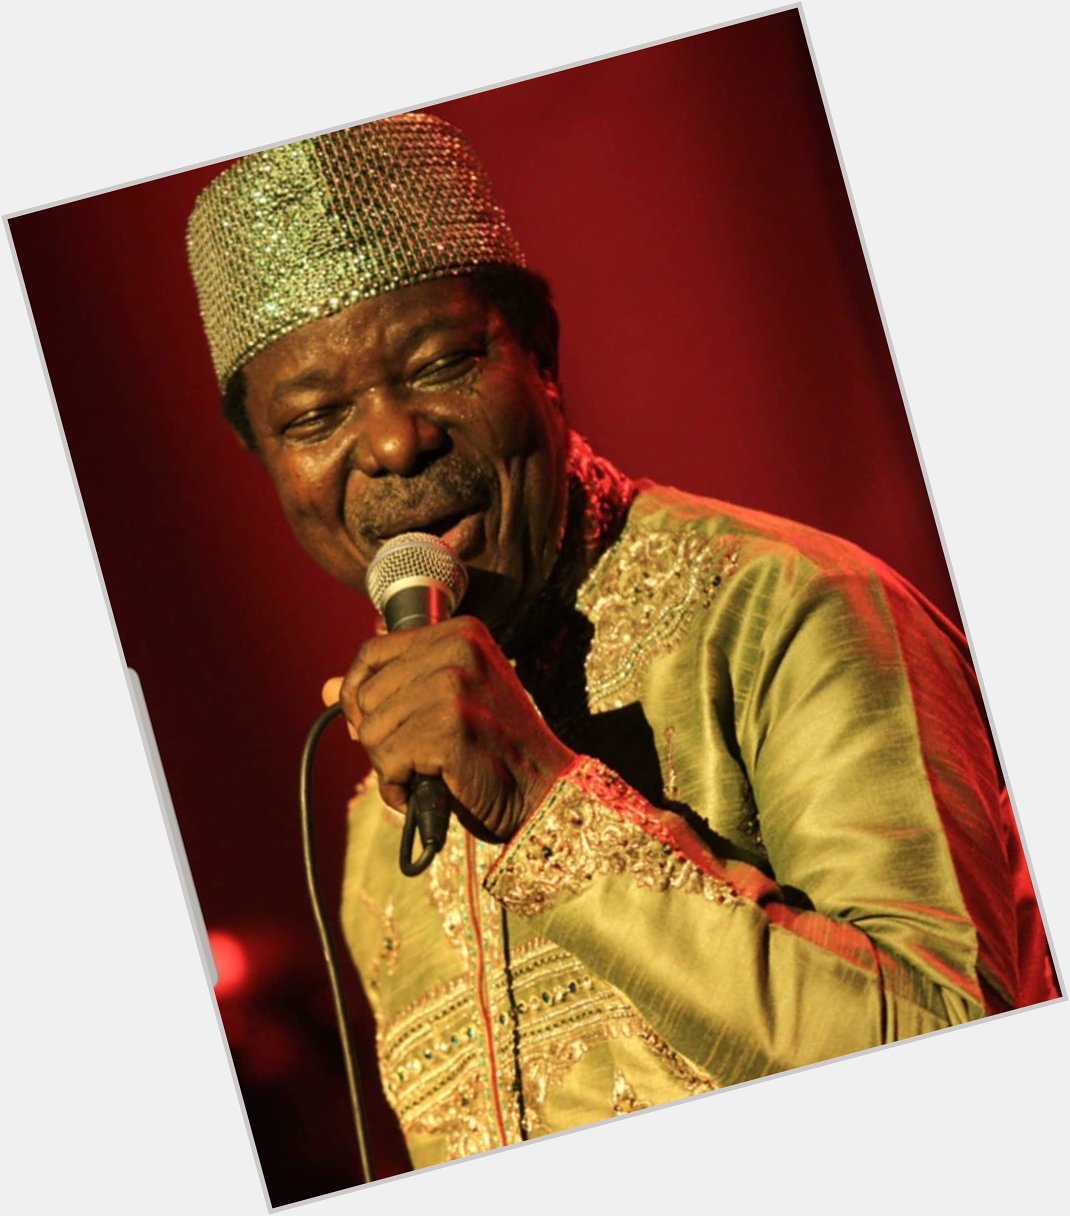 Happy 73rd Birthday to a Legend, King Sunny Ade 